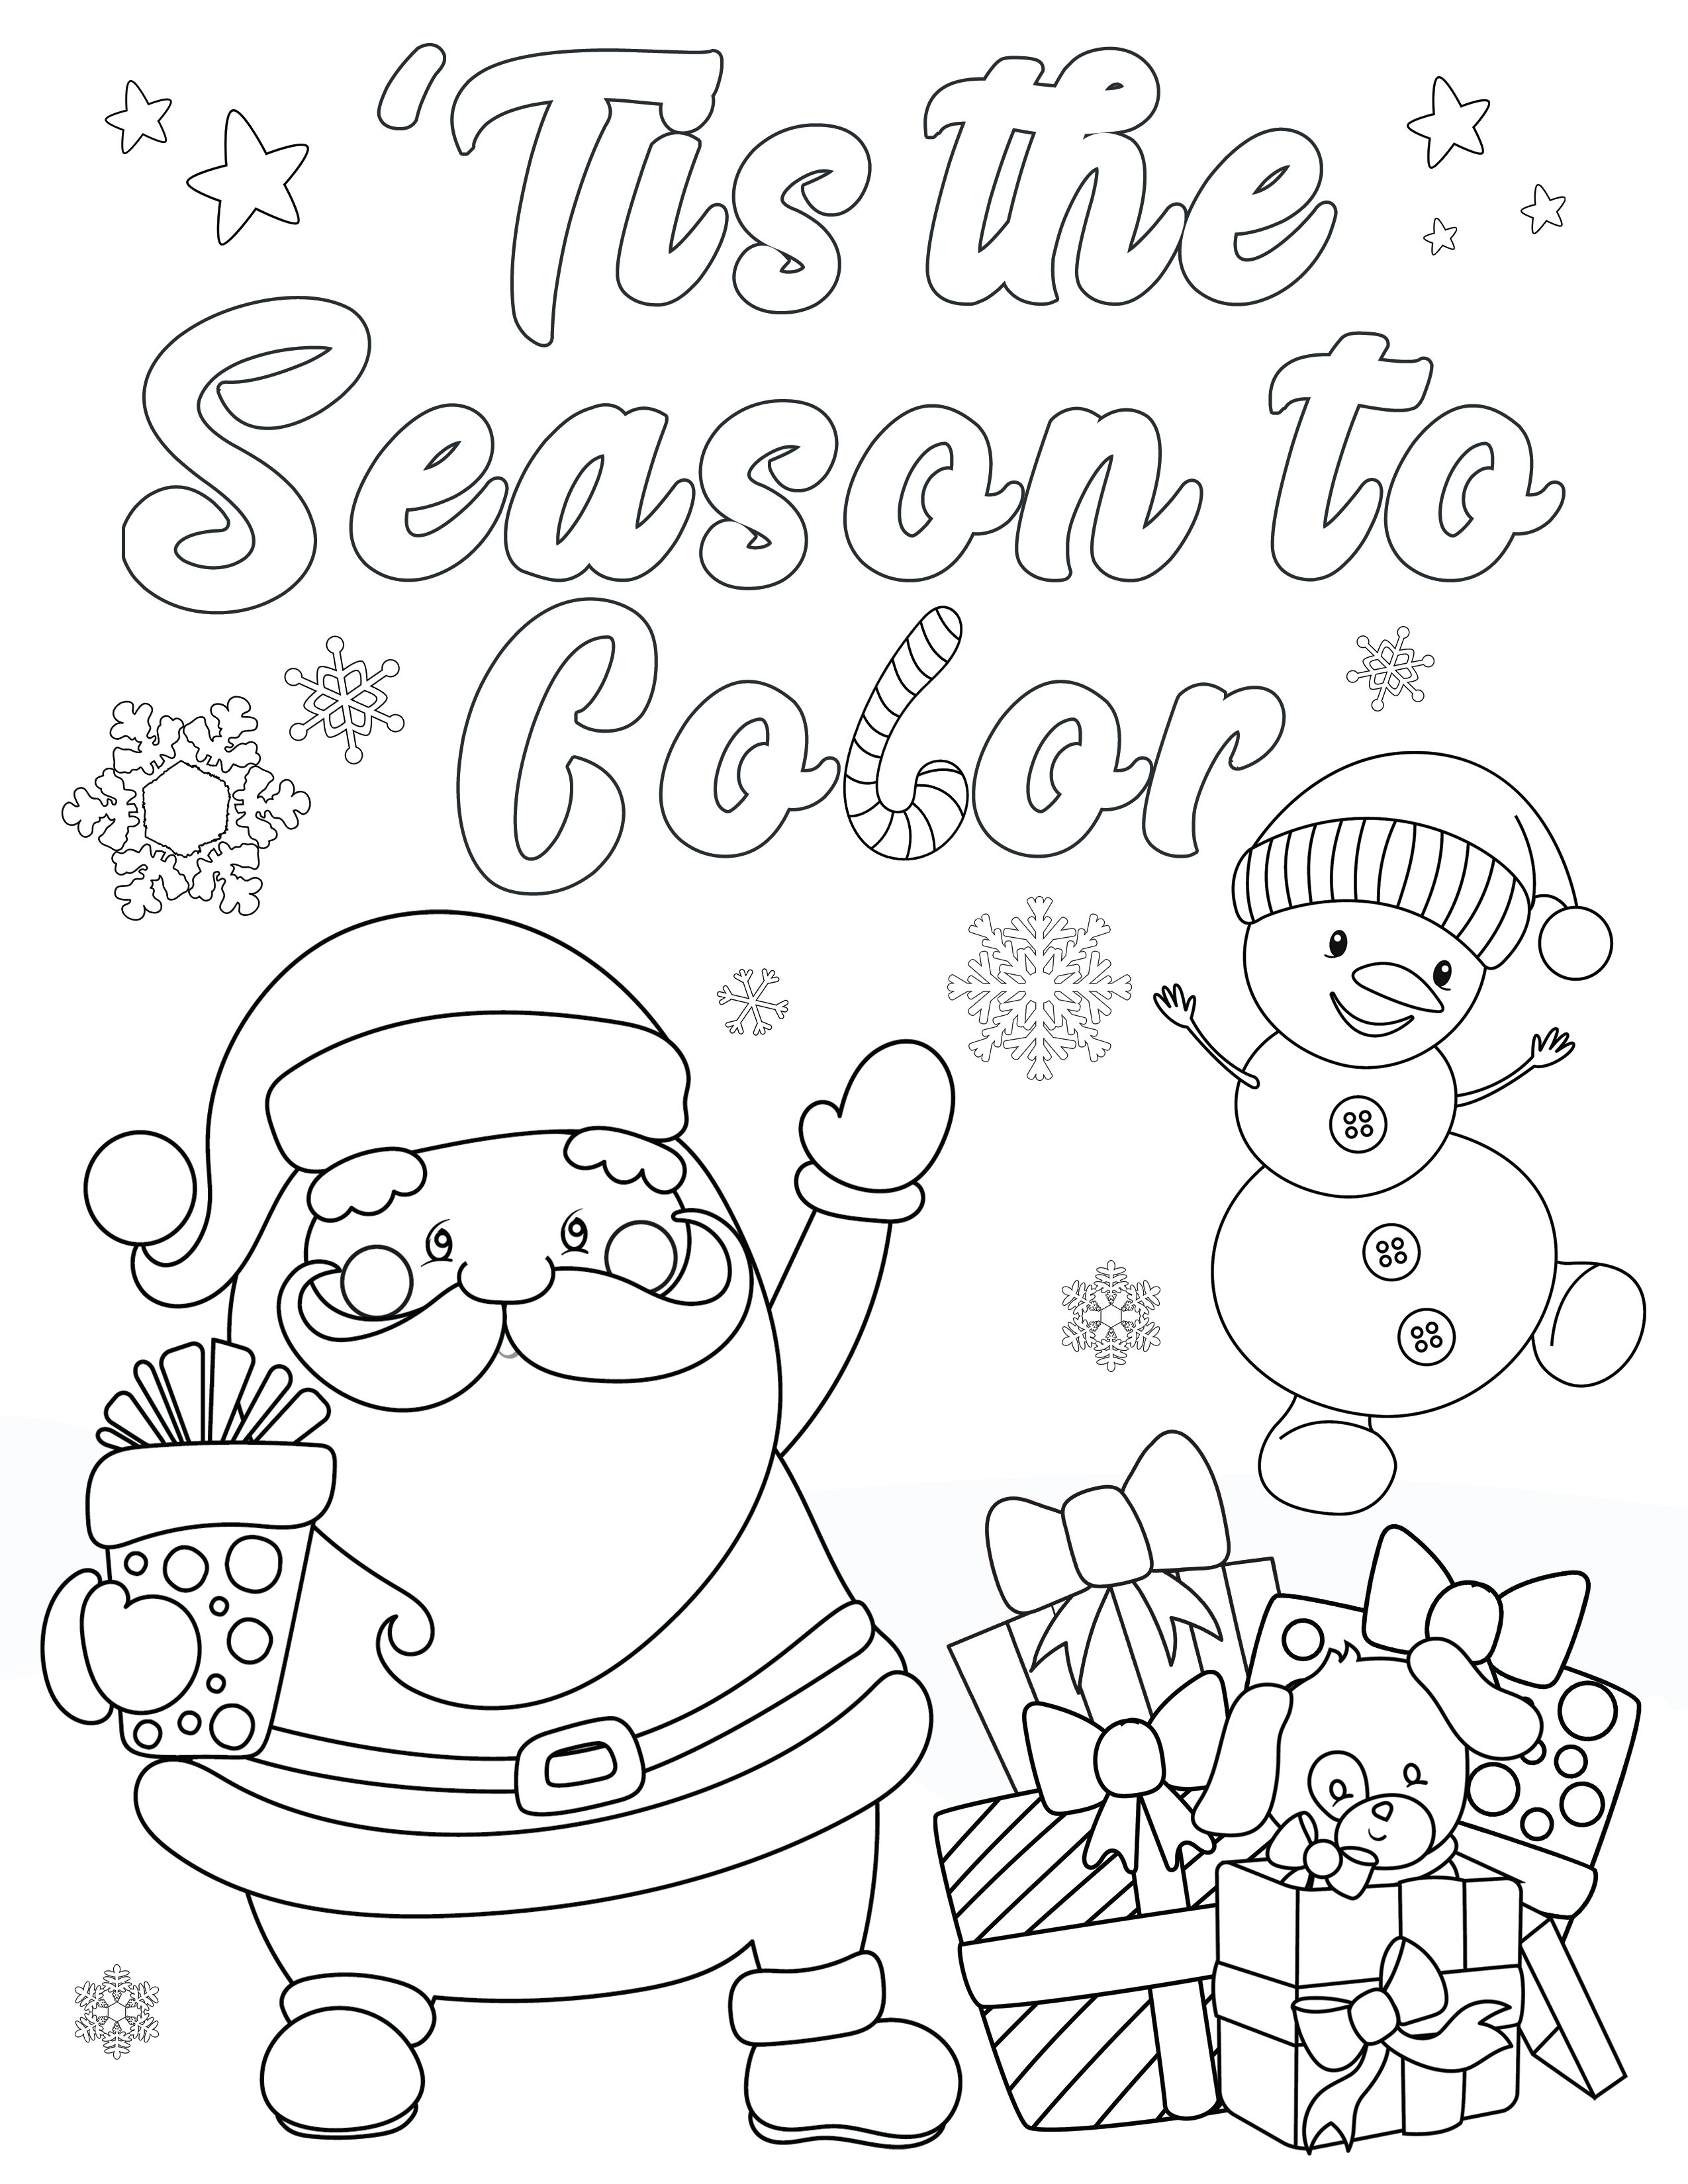 FREE Christmas Coloring Pages for Adults and Kids ...